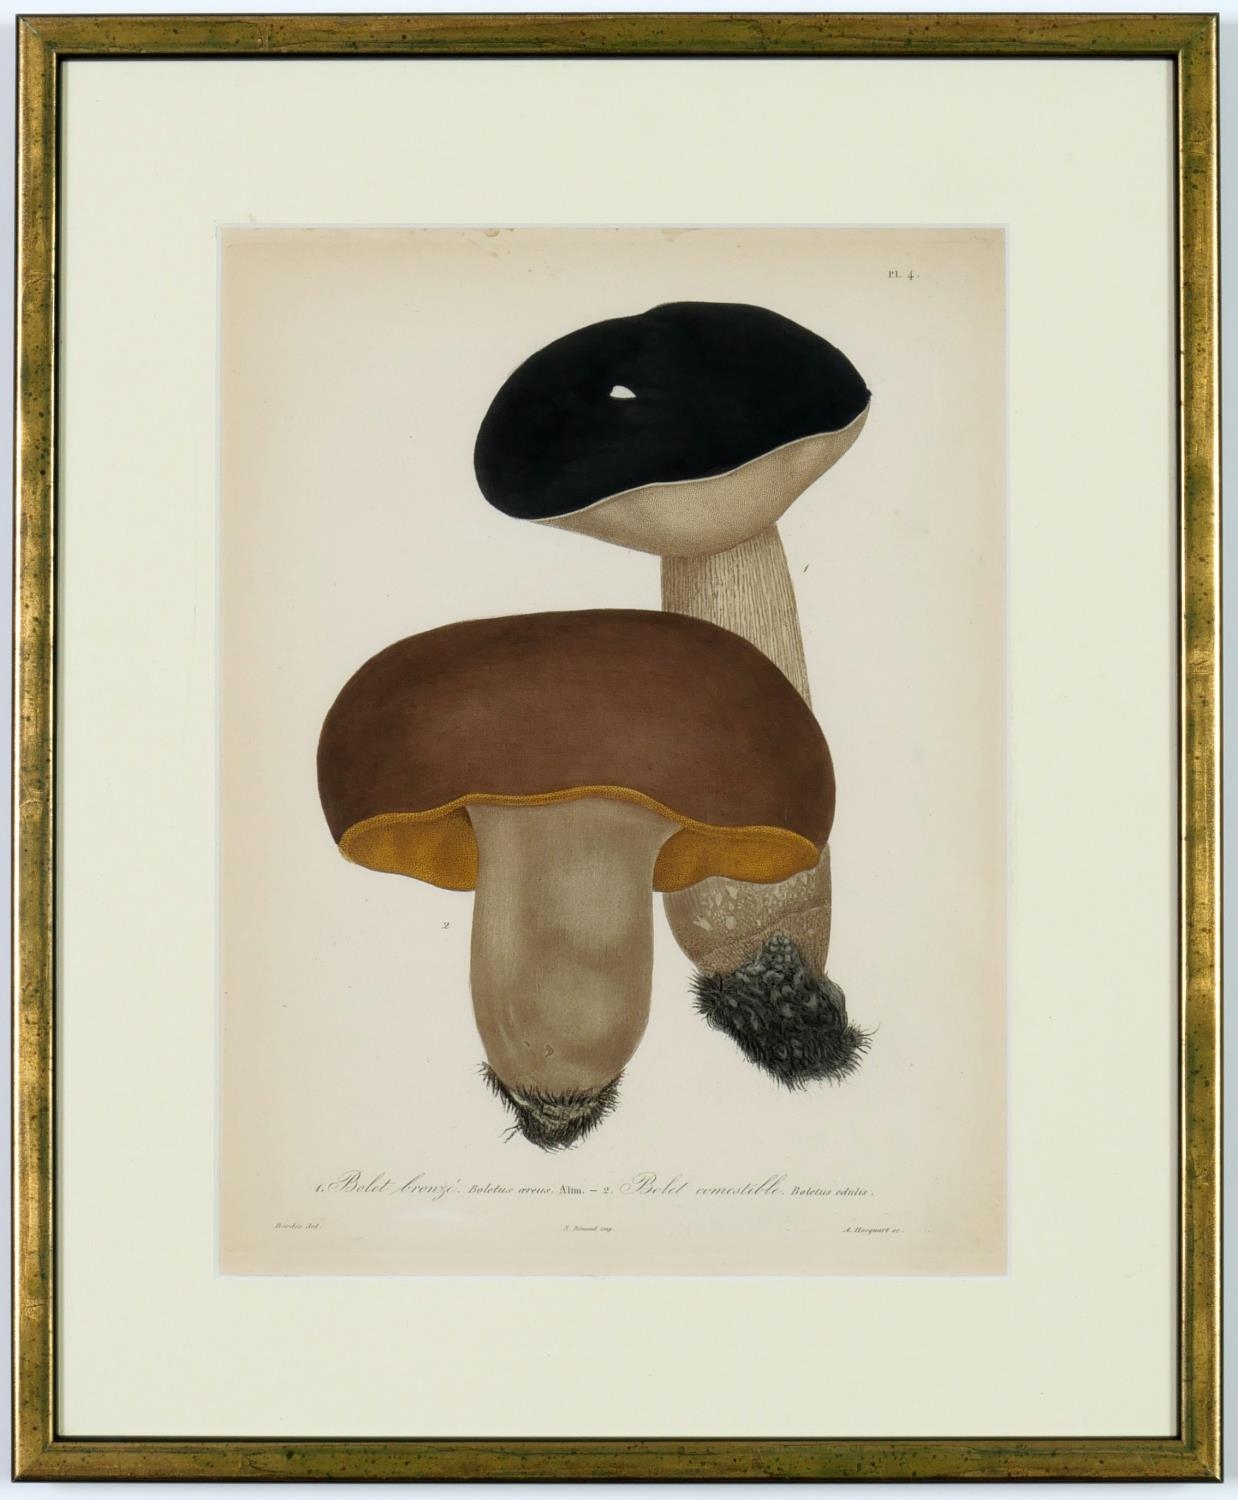 JOSEPH ROQUES, Mushrooms, a set of nine rare engravings with hand colouring, 1864, Victor Masson - Image 10 of 10